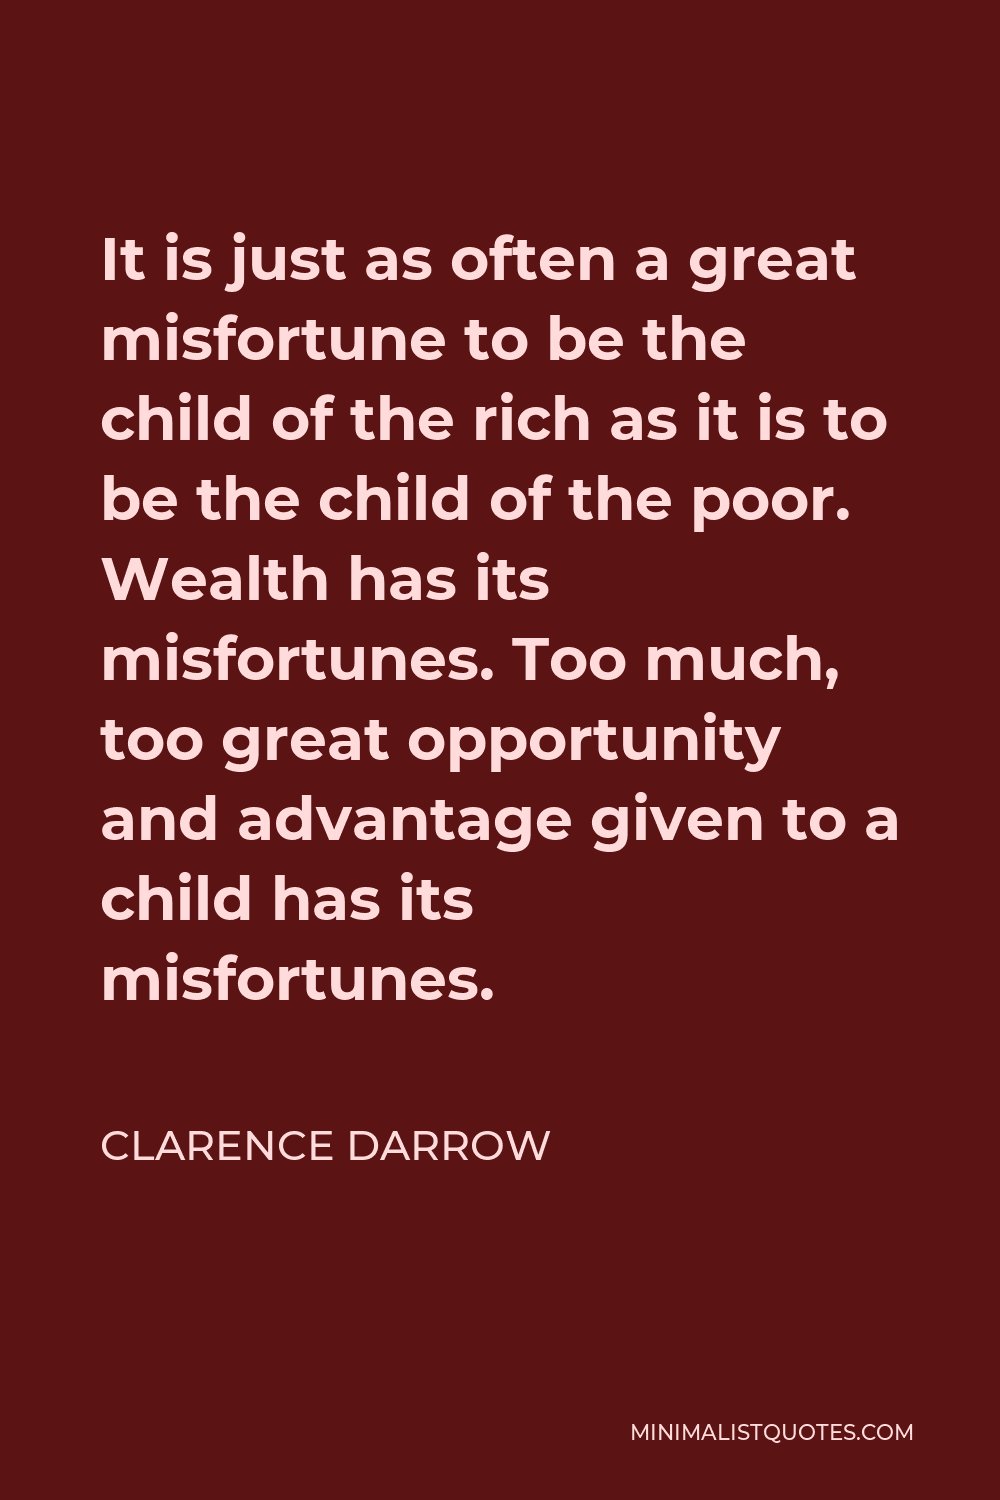 Clarence Darrow Quote - It is just as often a great misfortune to be the child of the rich as it is to be the child of the poor. Wealth has its misfortunes. Too much, too great opportunity and advantage given to a child has its misfortunes.